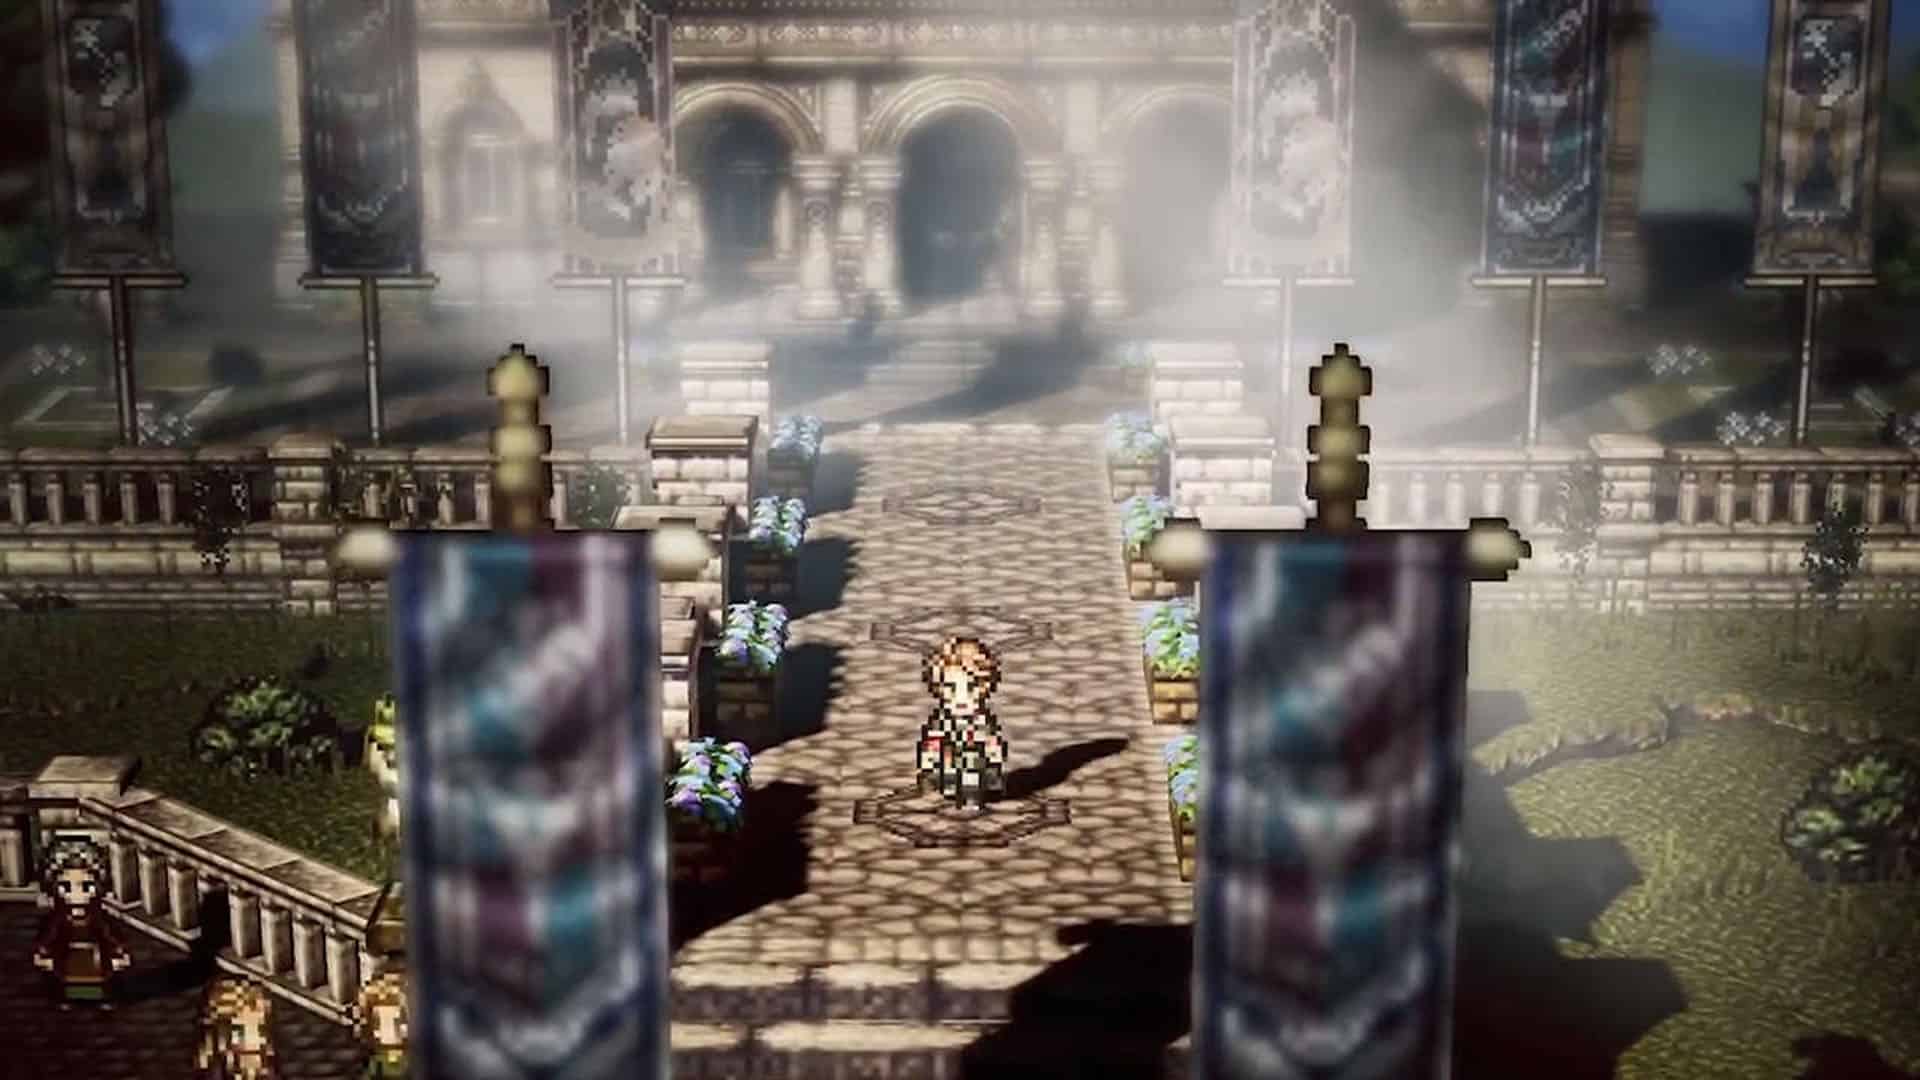 octopath traveler champions of the continent download free